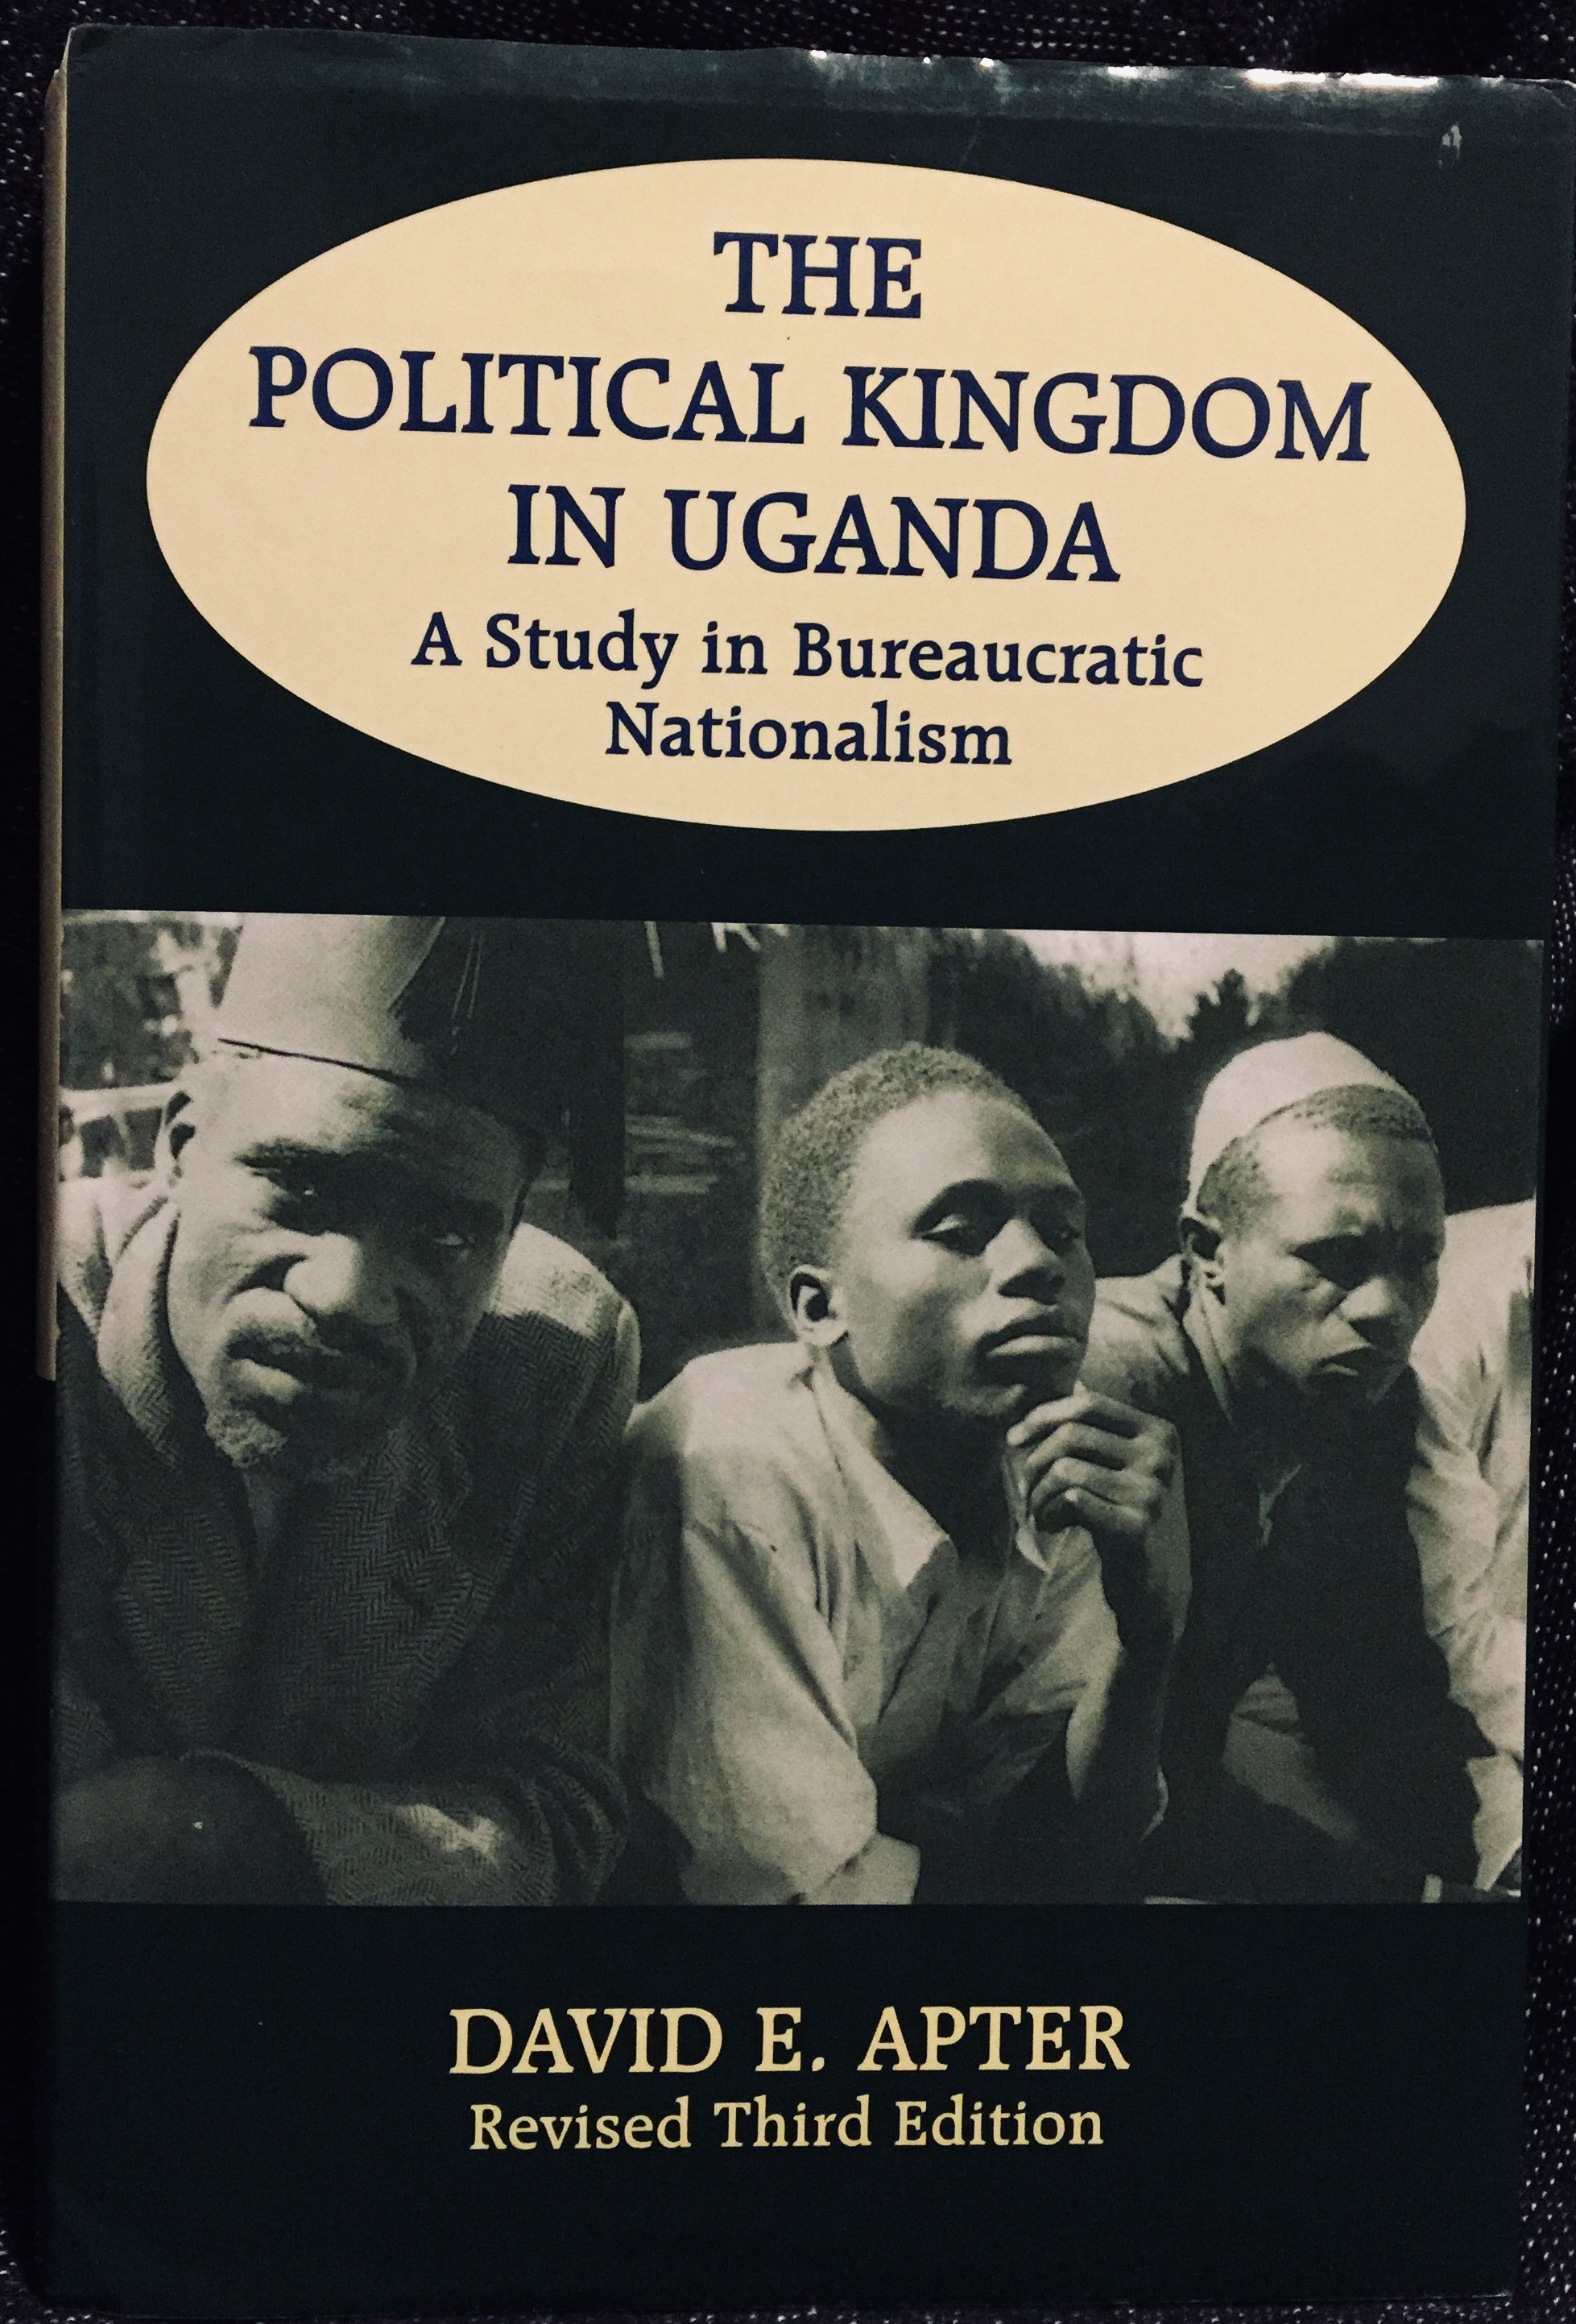 The Political Kingdom in Uganda: A Study in Bureaucratic Nationalism – By David E. Apter (Revised Third Edition, 1997)